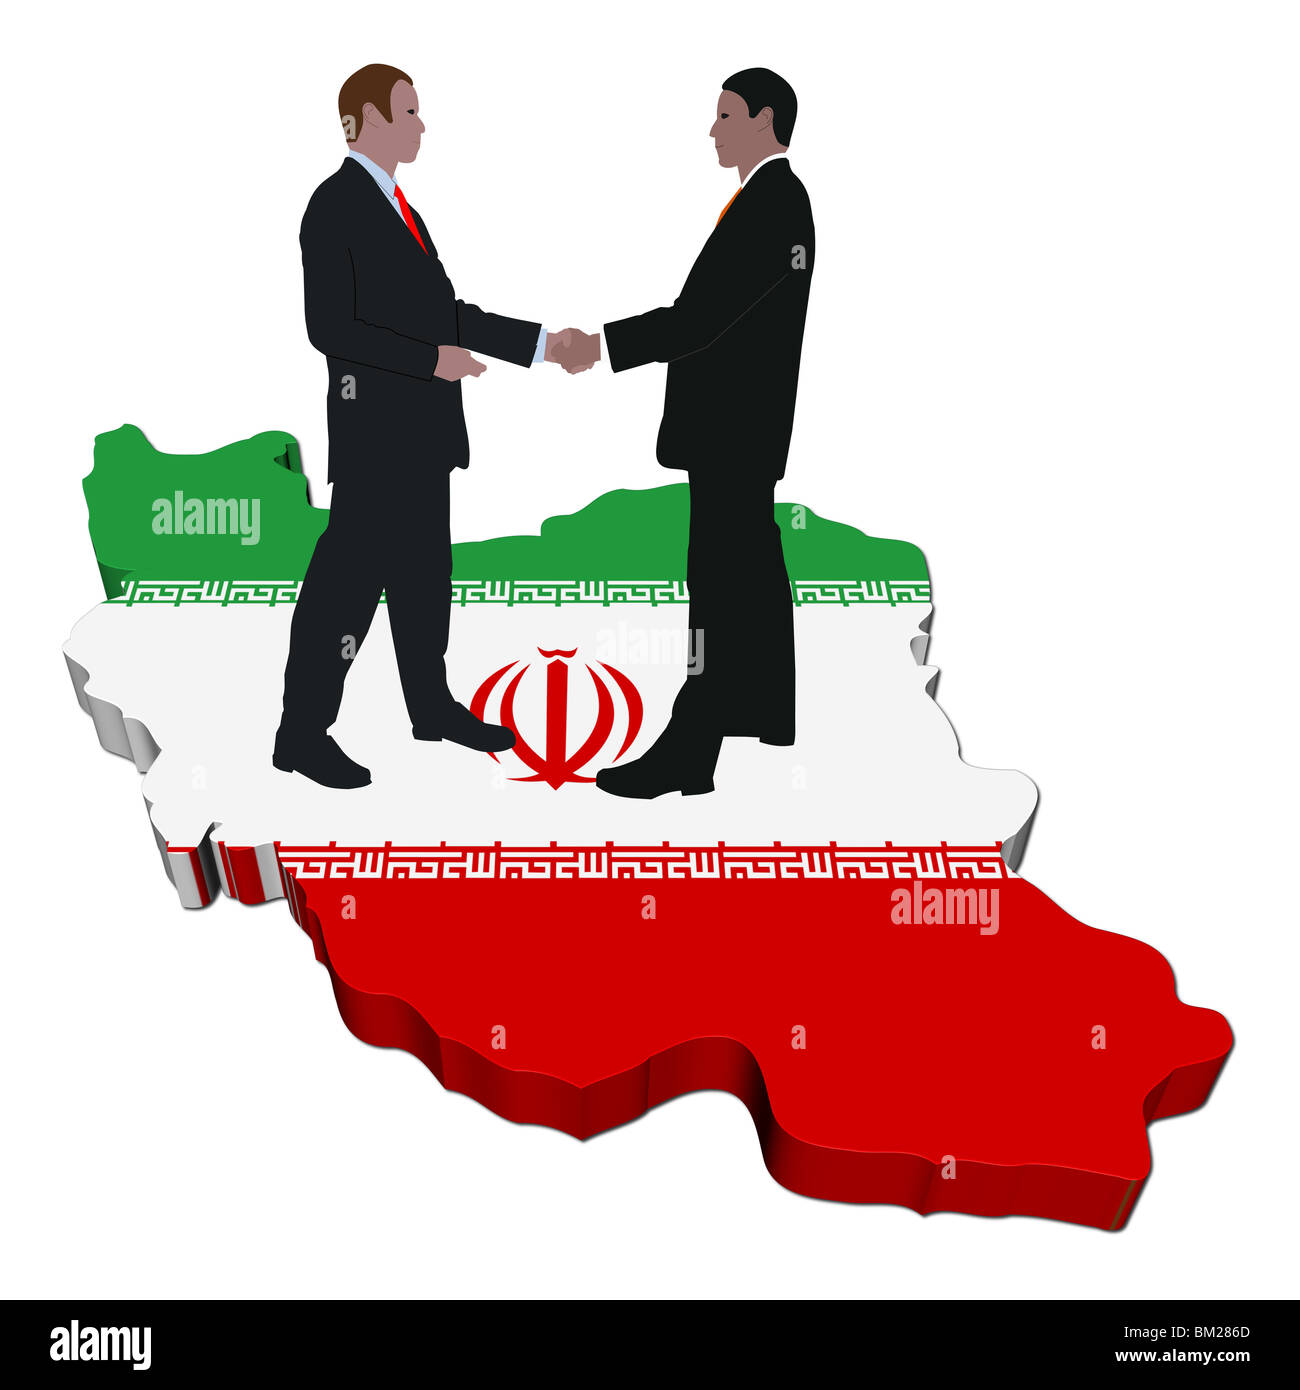 Business people shaking hands on Iran map flag illustration Stock Photo